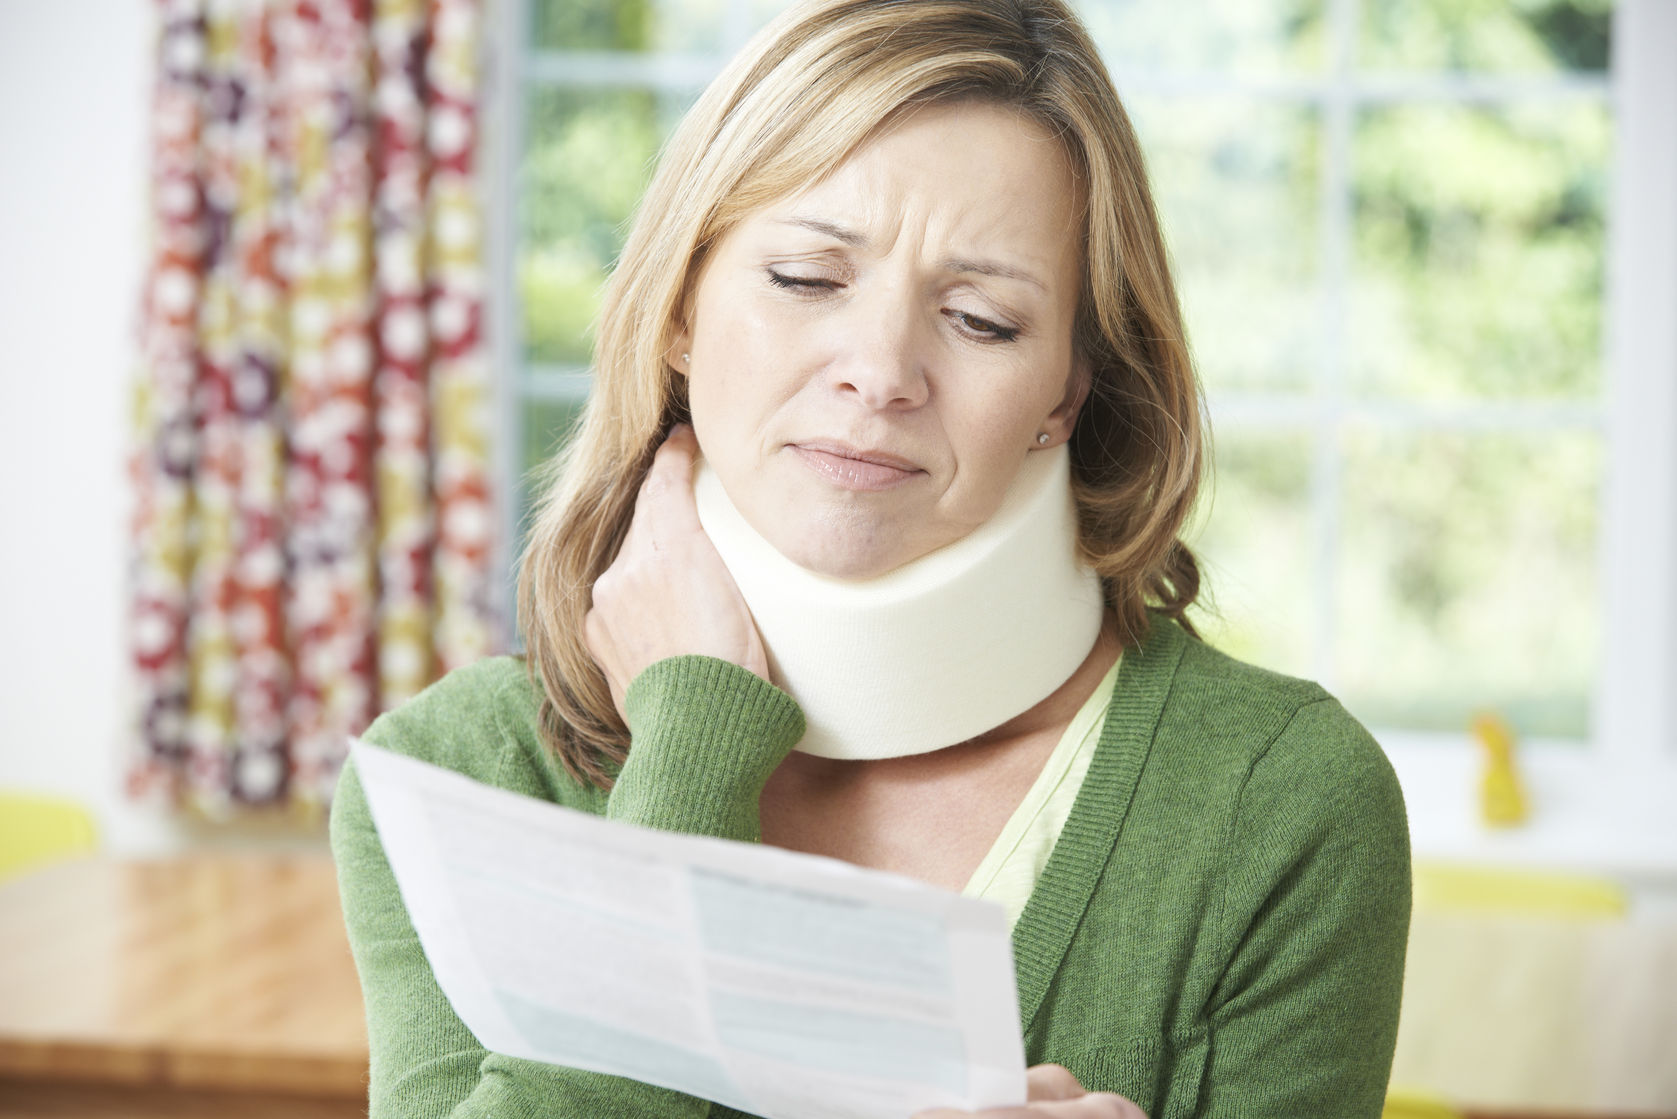 47816524 - woman reading letter after receiving neck injury